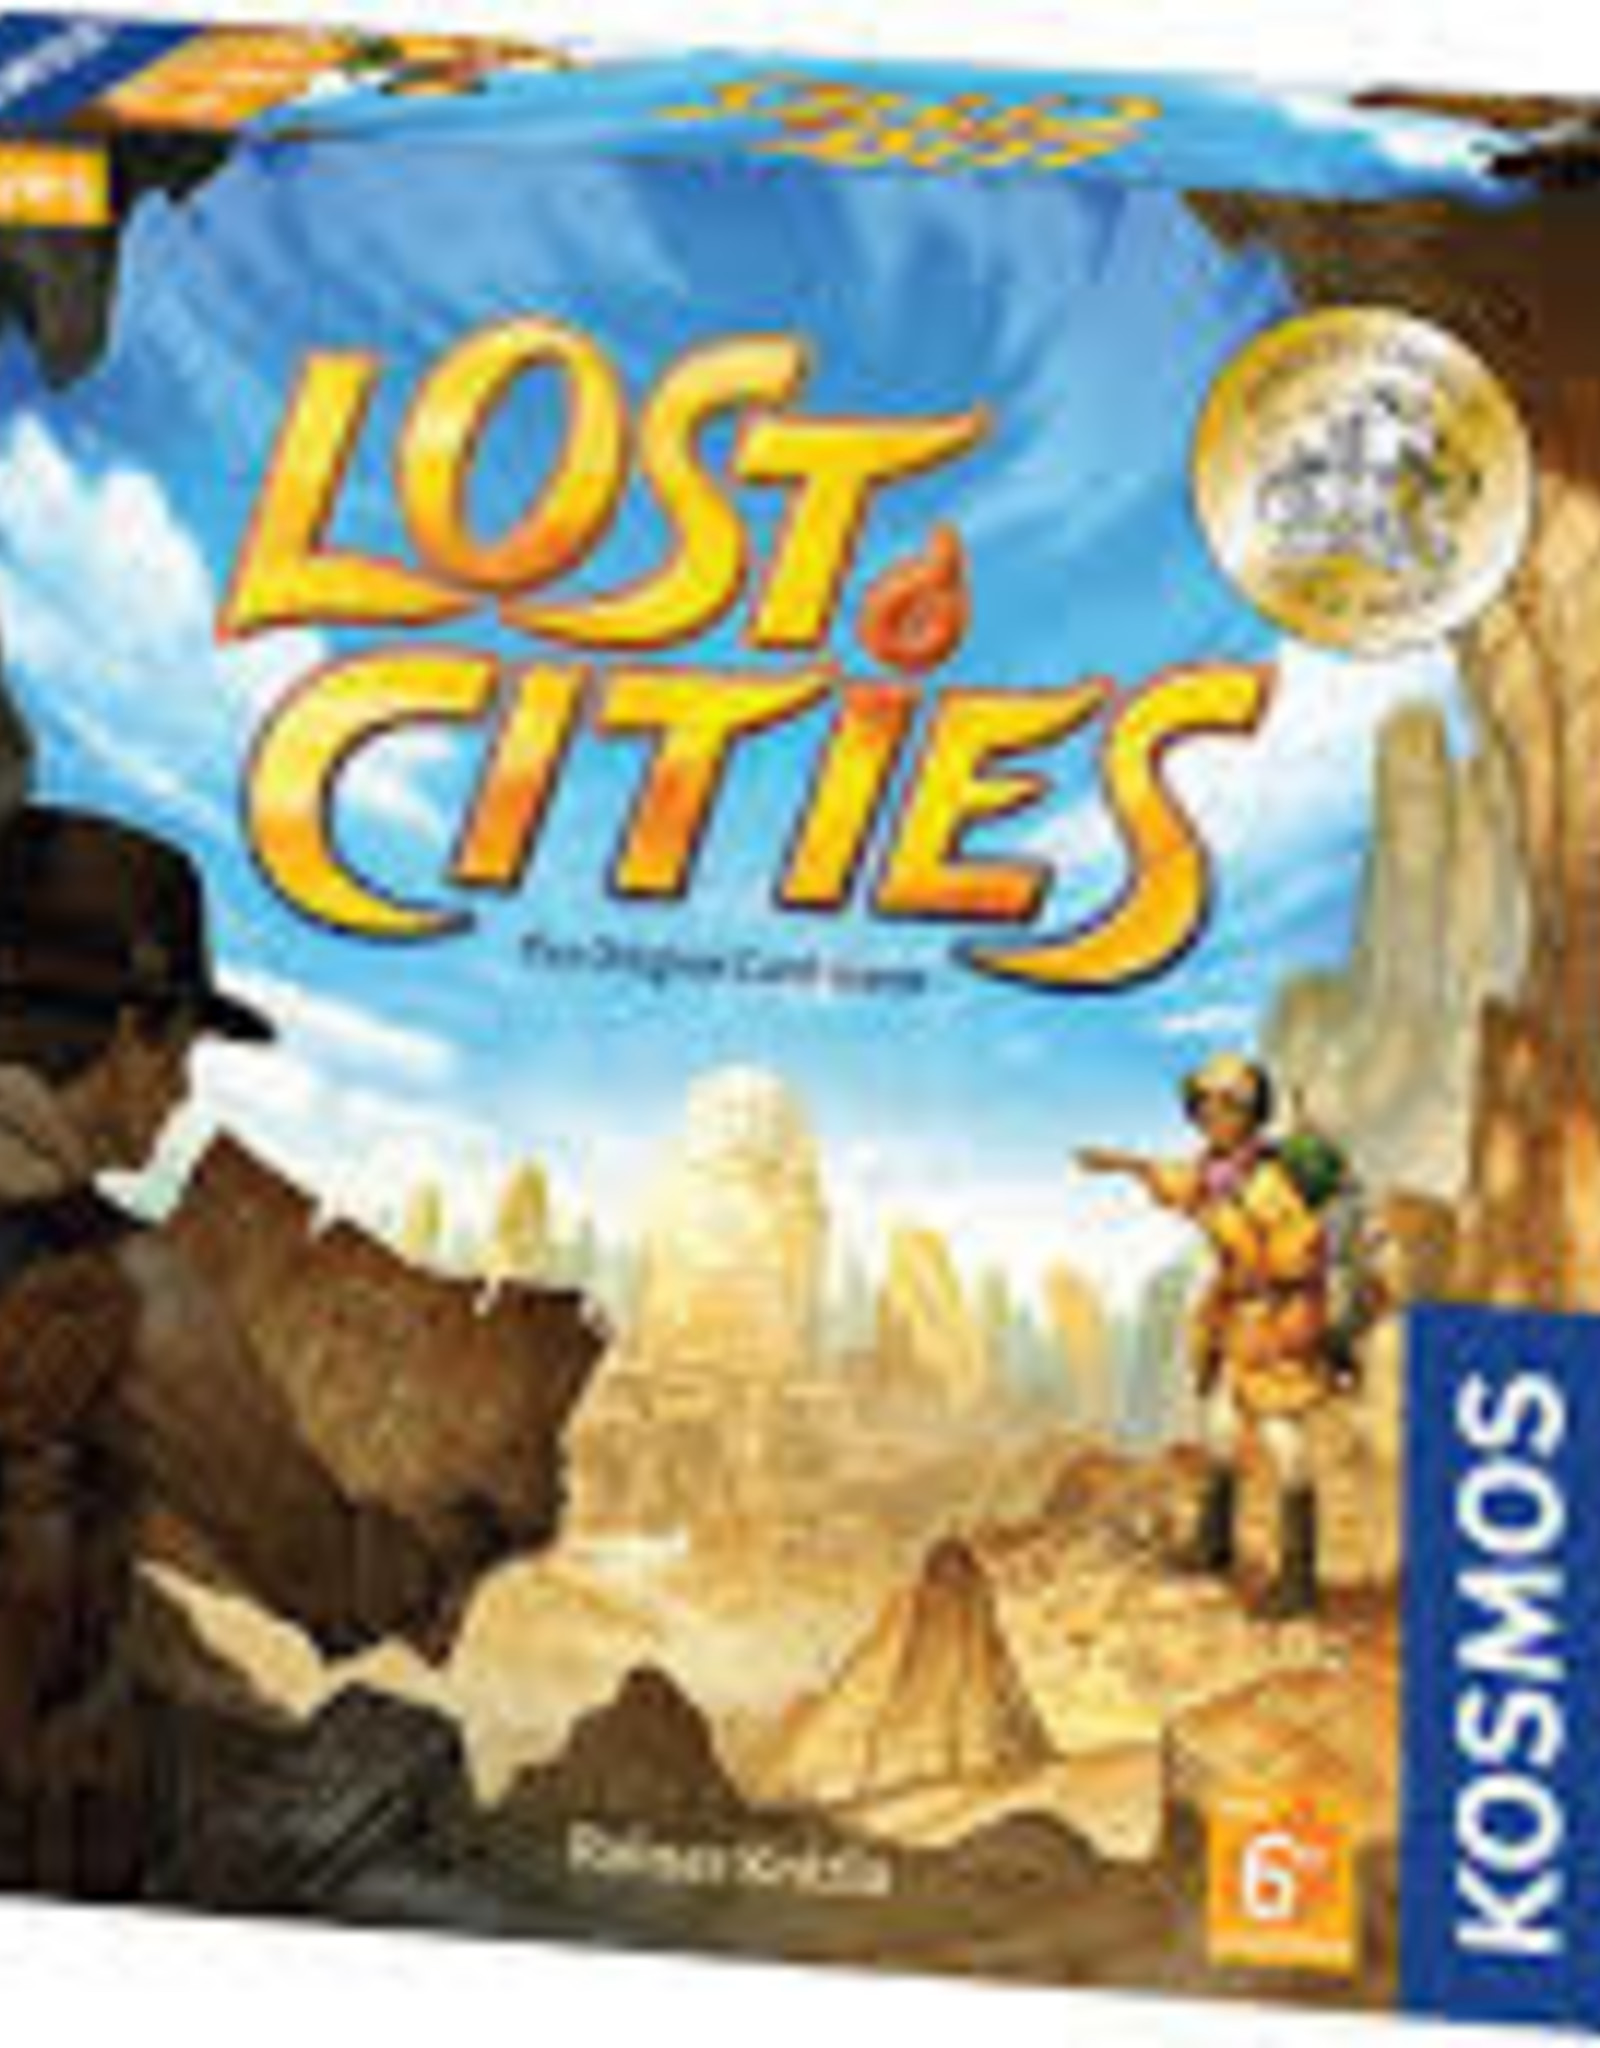 Thames & Kosmos LOST CITIES CARD GAME - WITH 6TH EXPEDITION